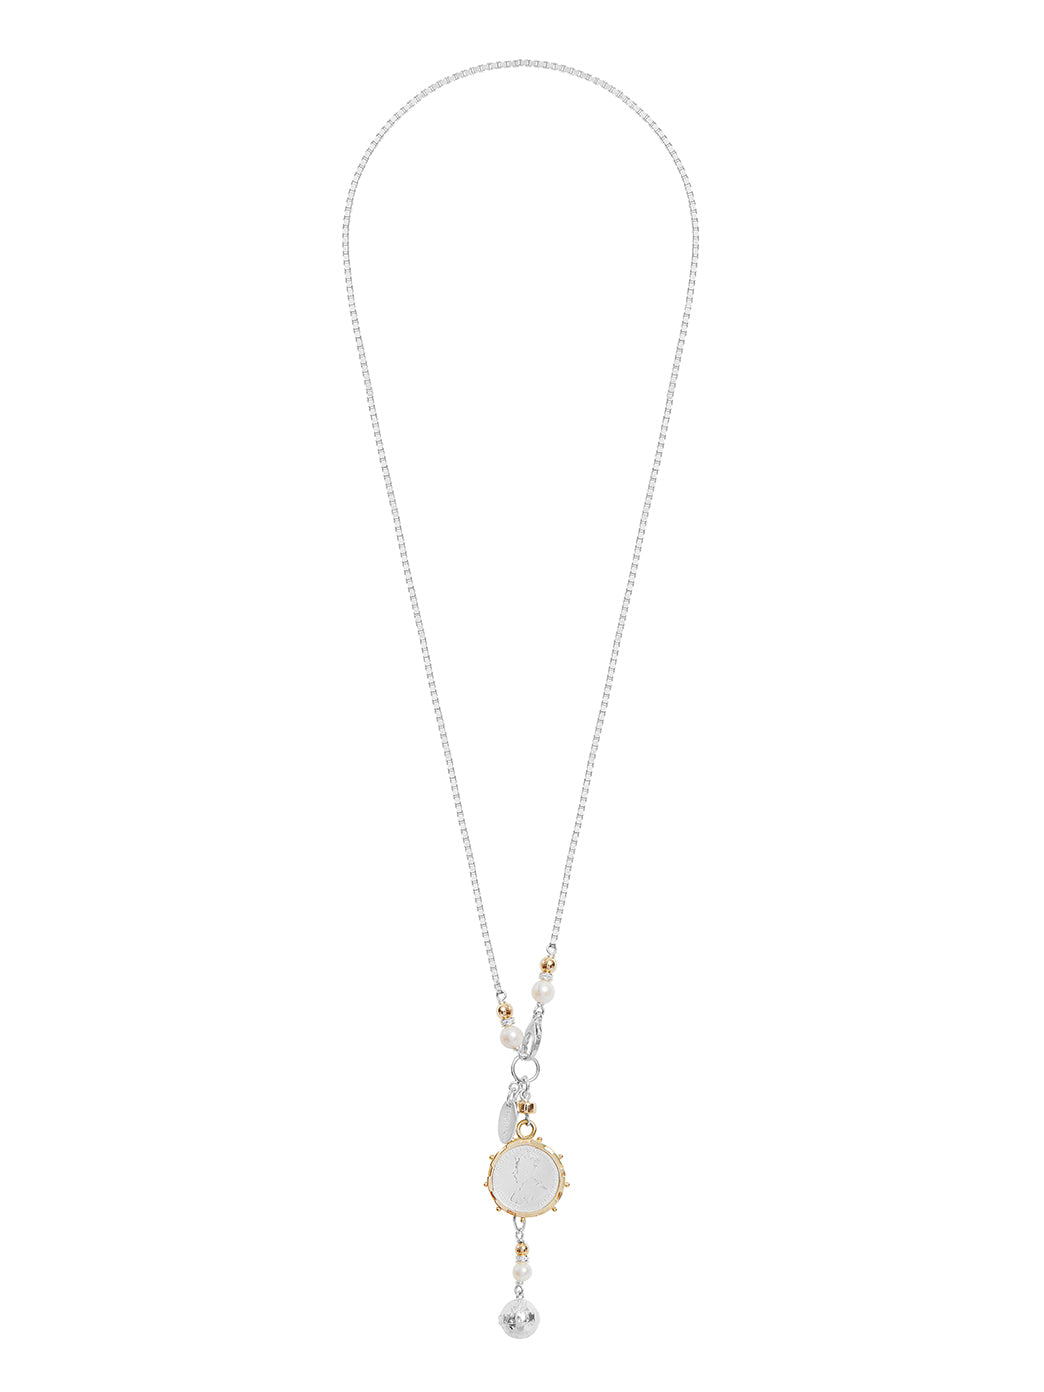 Fiorina Jewellery Gold Encased Jupiter Necklace Pearl and Gold